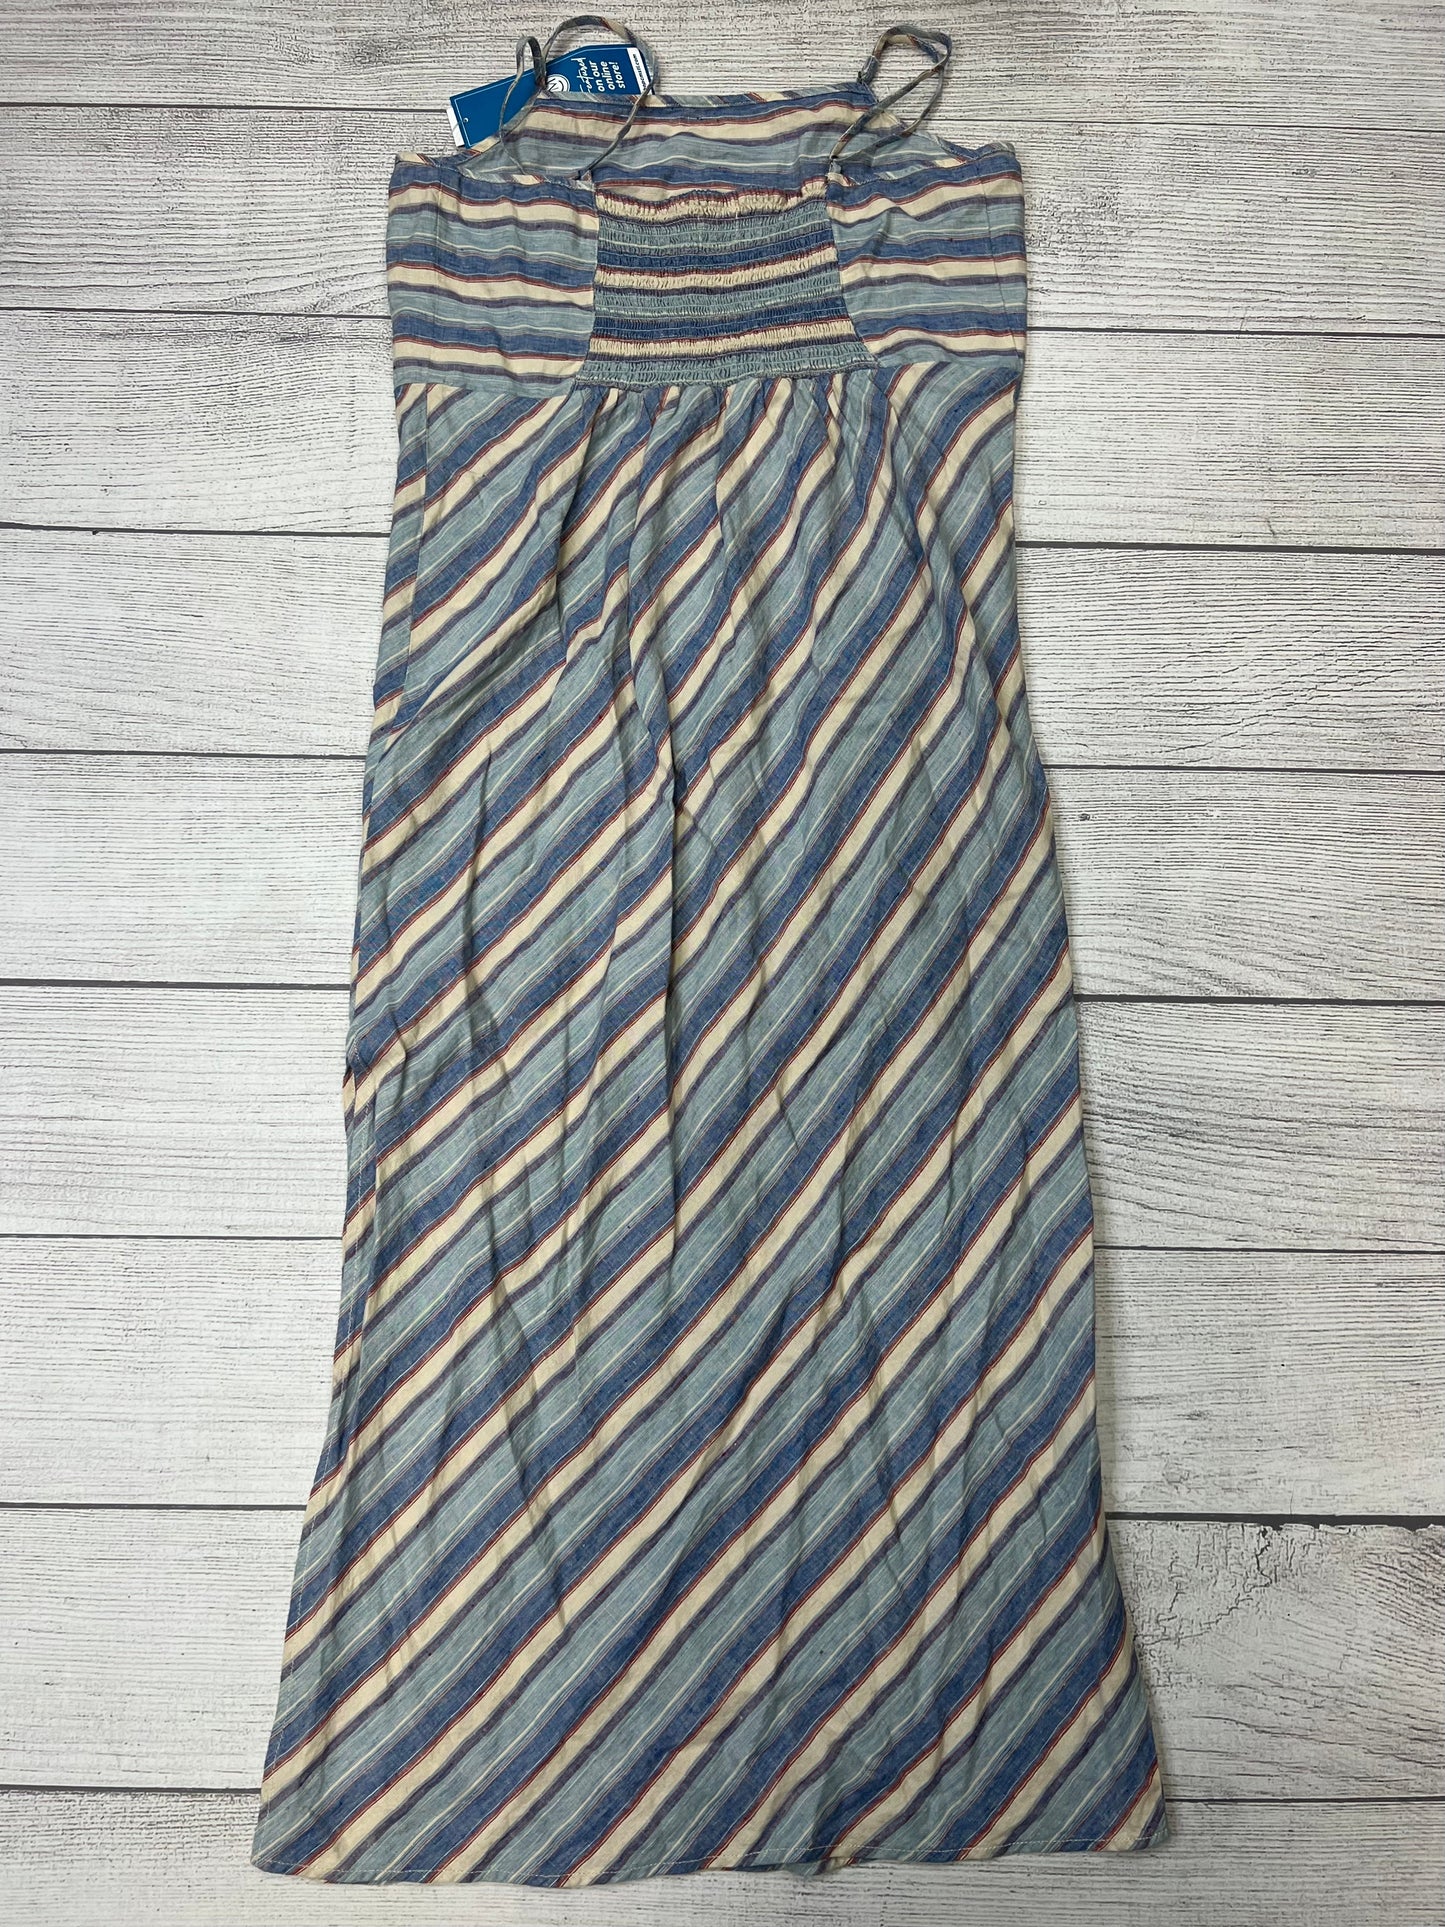 Striped Dress Casual Maxi Lou And Grey, Size Xl